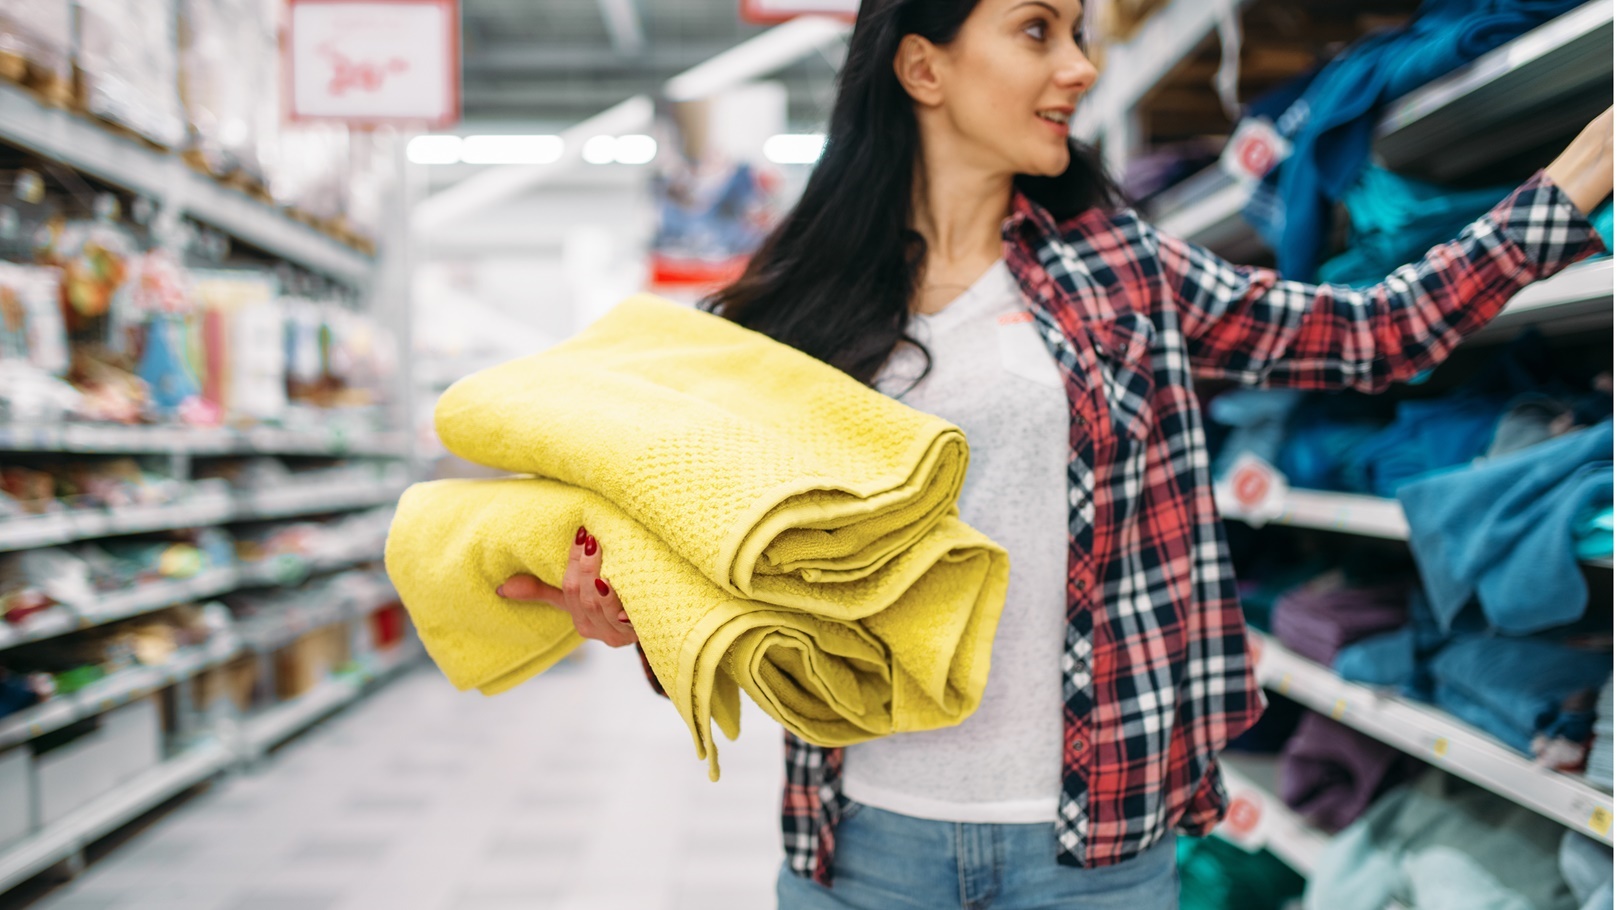 young-woman-buying-towels-in-supermarket-2021-08-26-16-26-51-utc